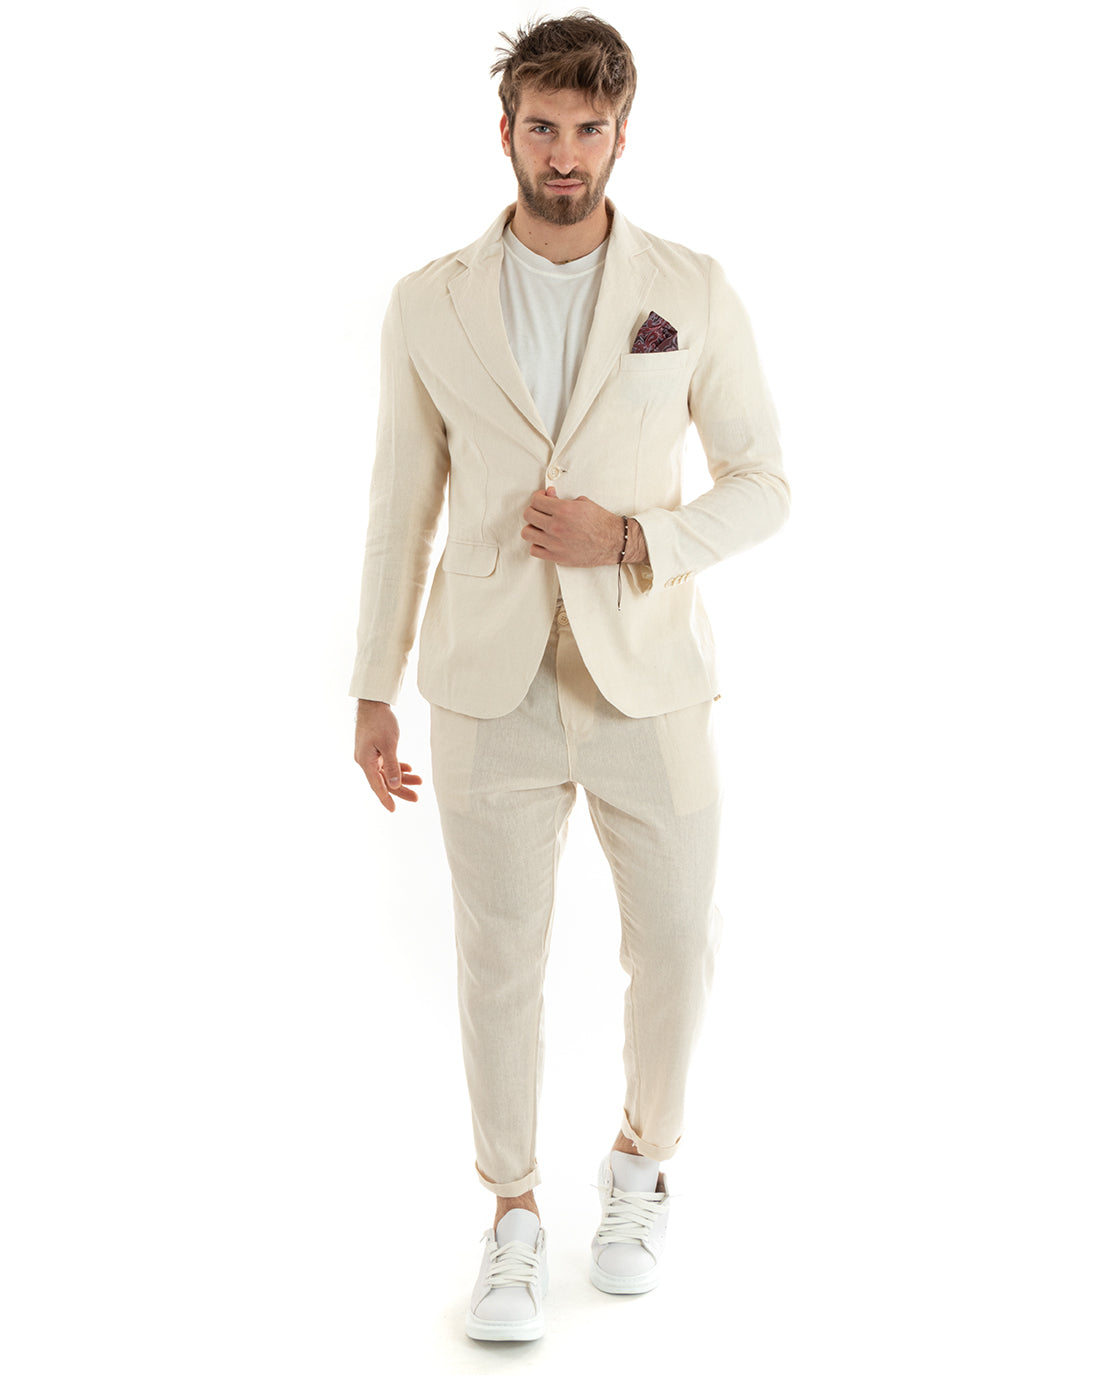 Single-Breasted Men's Suit Tailored Linen Suit Jacket Trousers Solid Color Beige GIOSAL-OU2322A